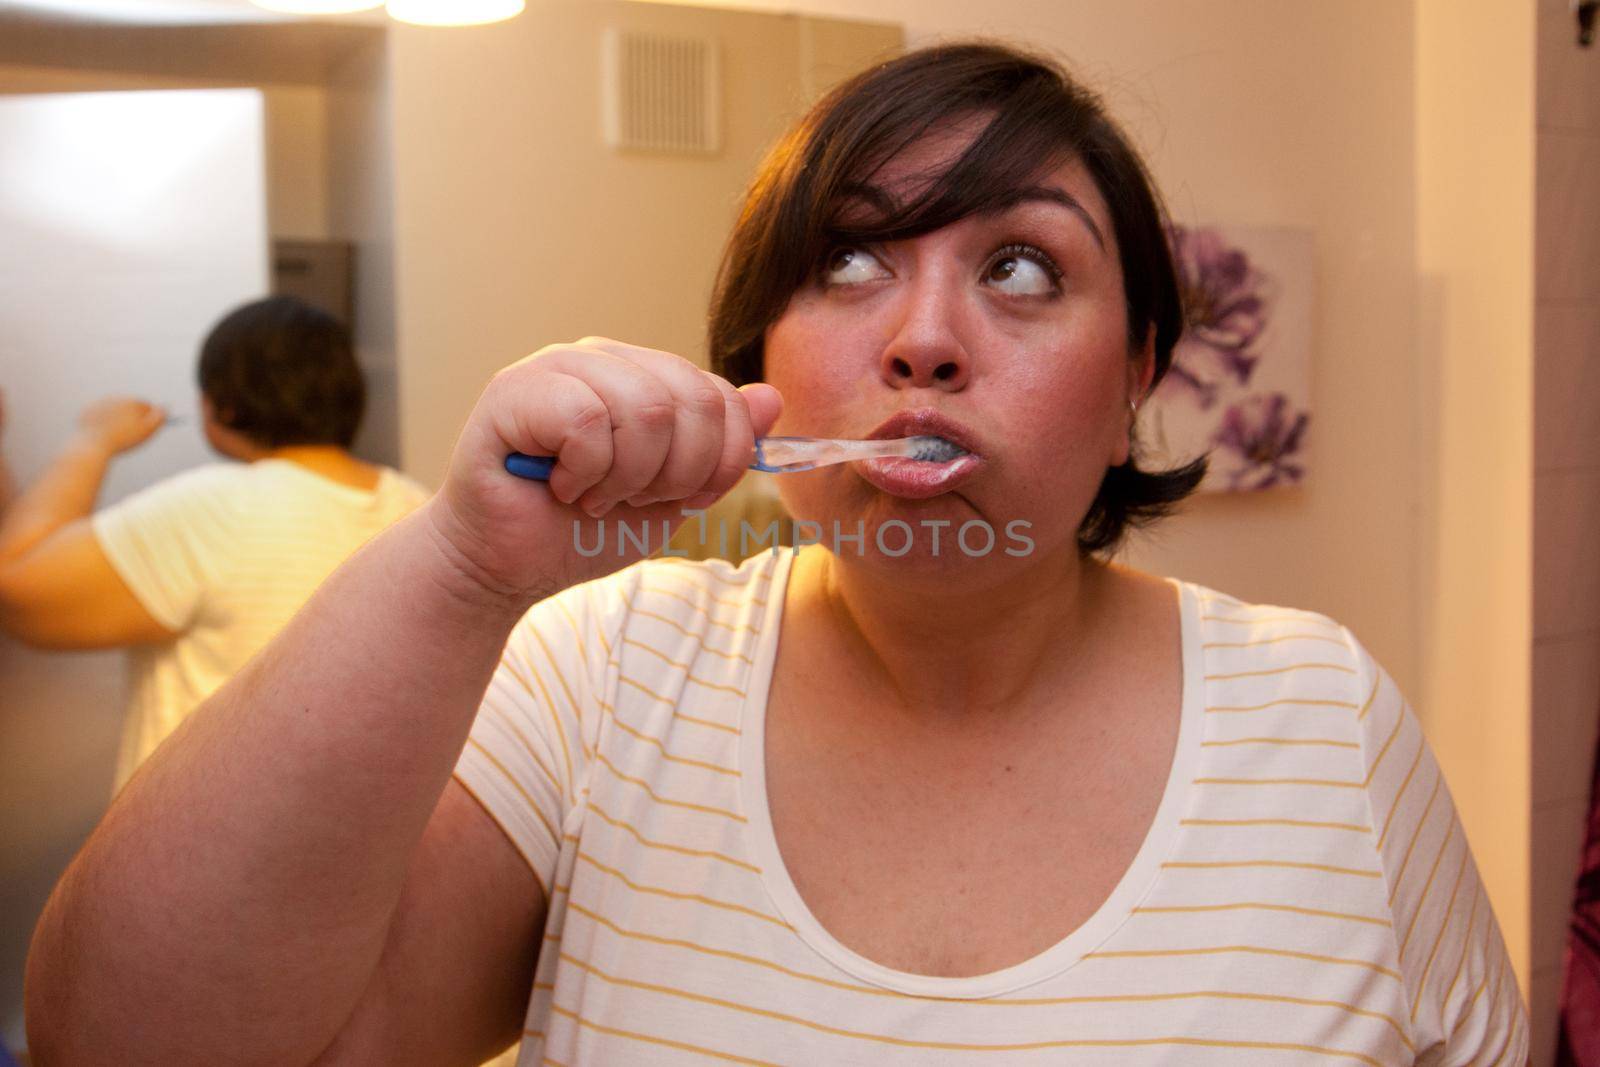 A woman brushes her teeth in the bathroom and raises her eyes in thought 